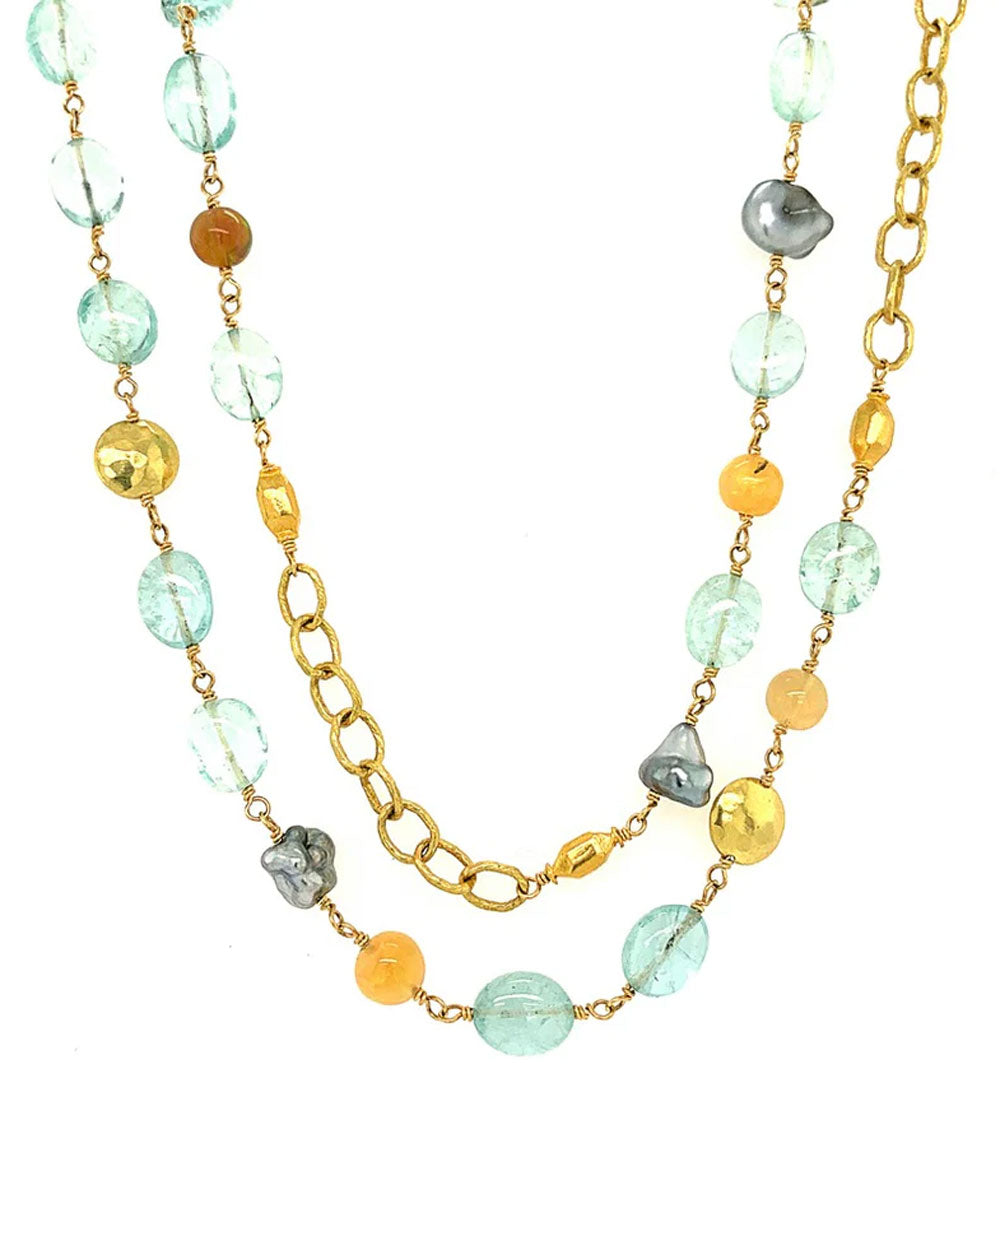 African Aquamarine and Ethiopian Opal Beaded Necklace